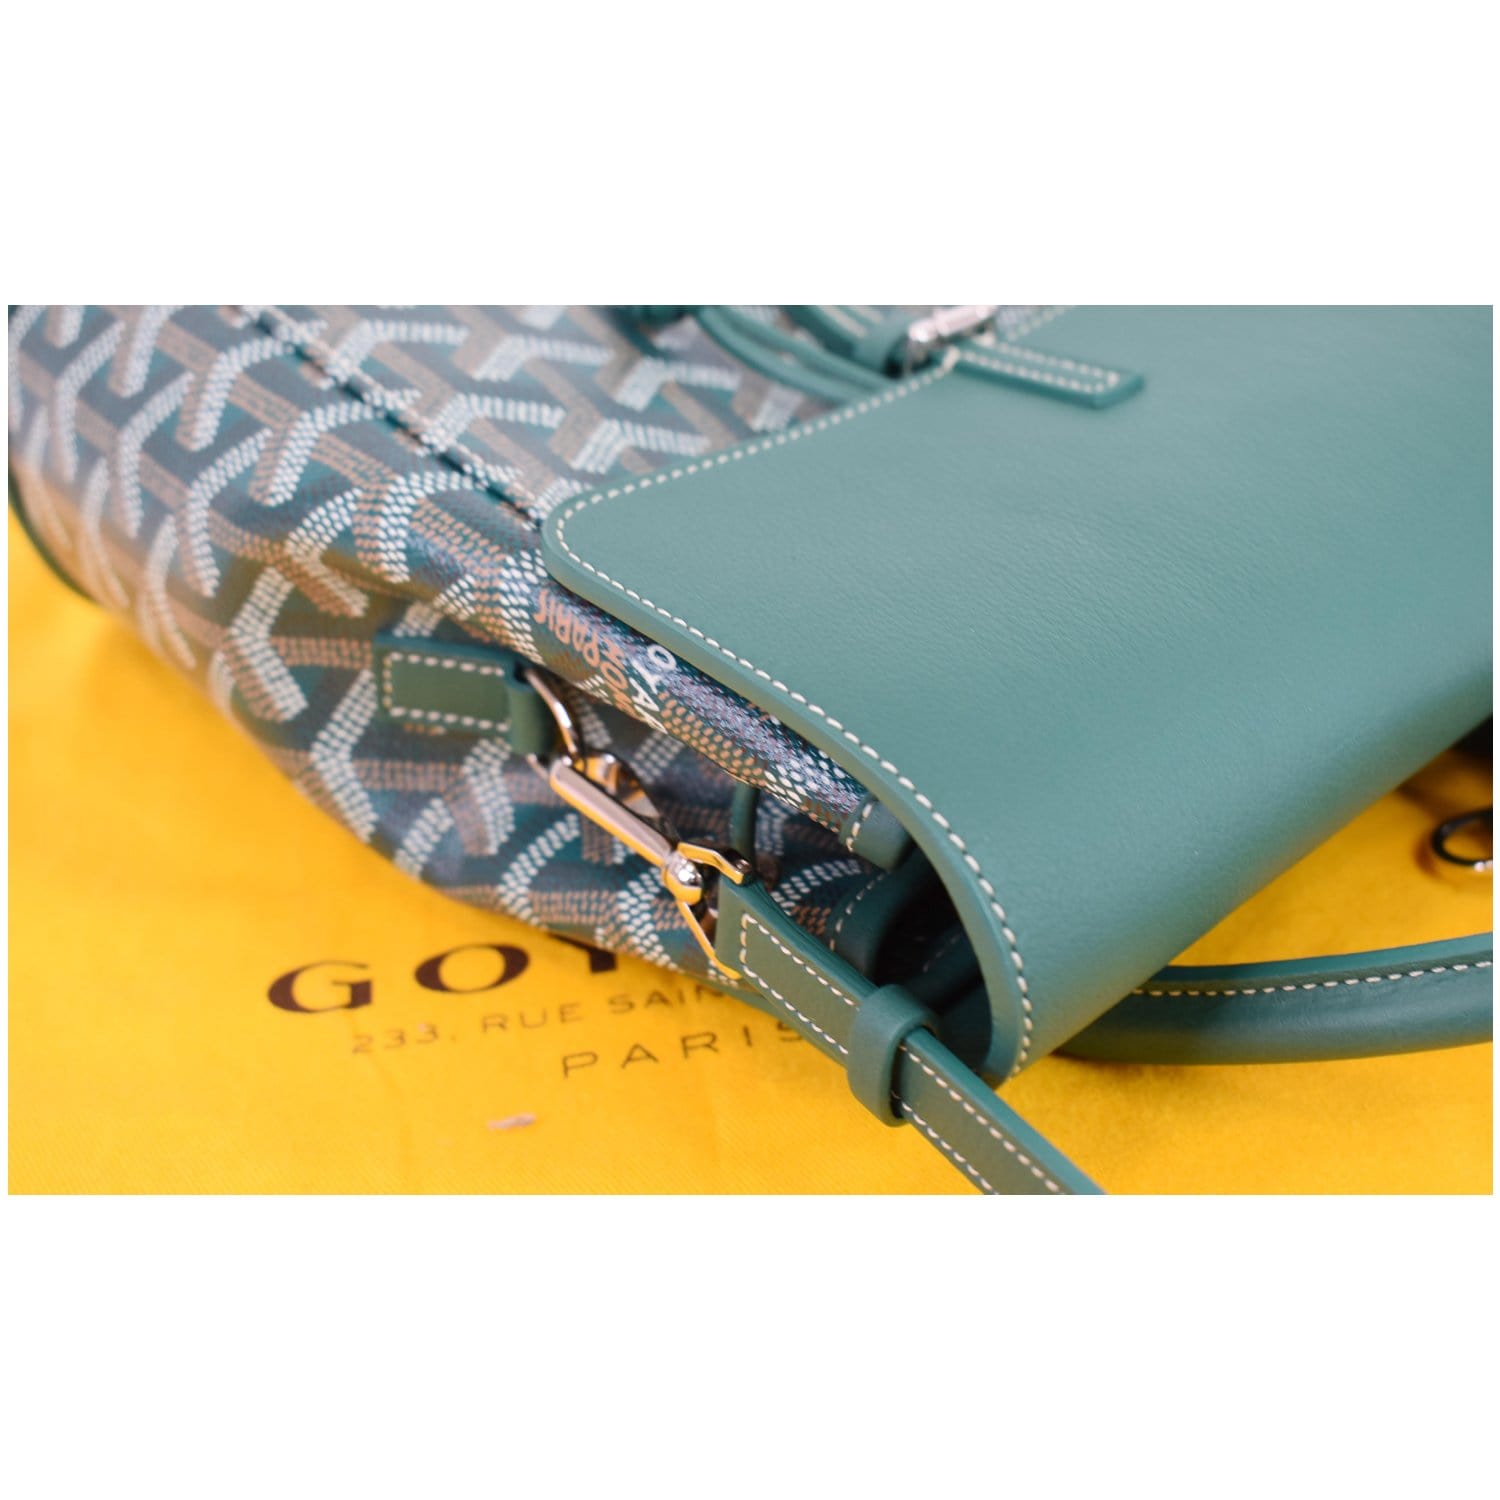 On the go  Bags, Goyard bag, Luxury bags collection